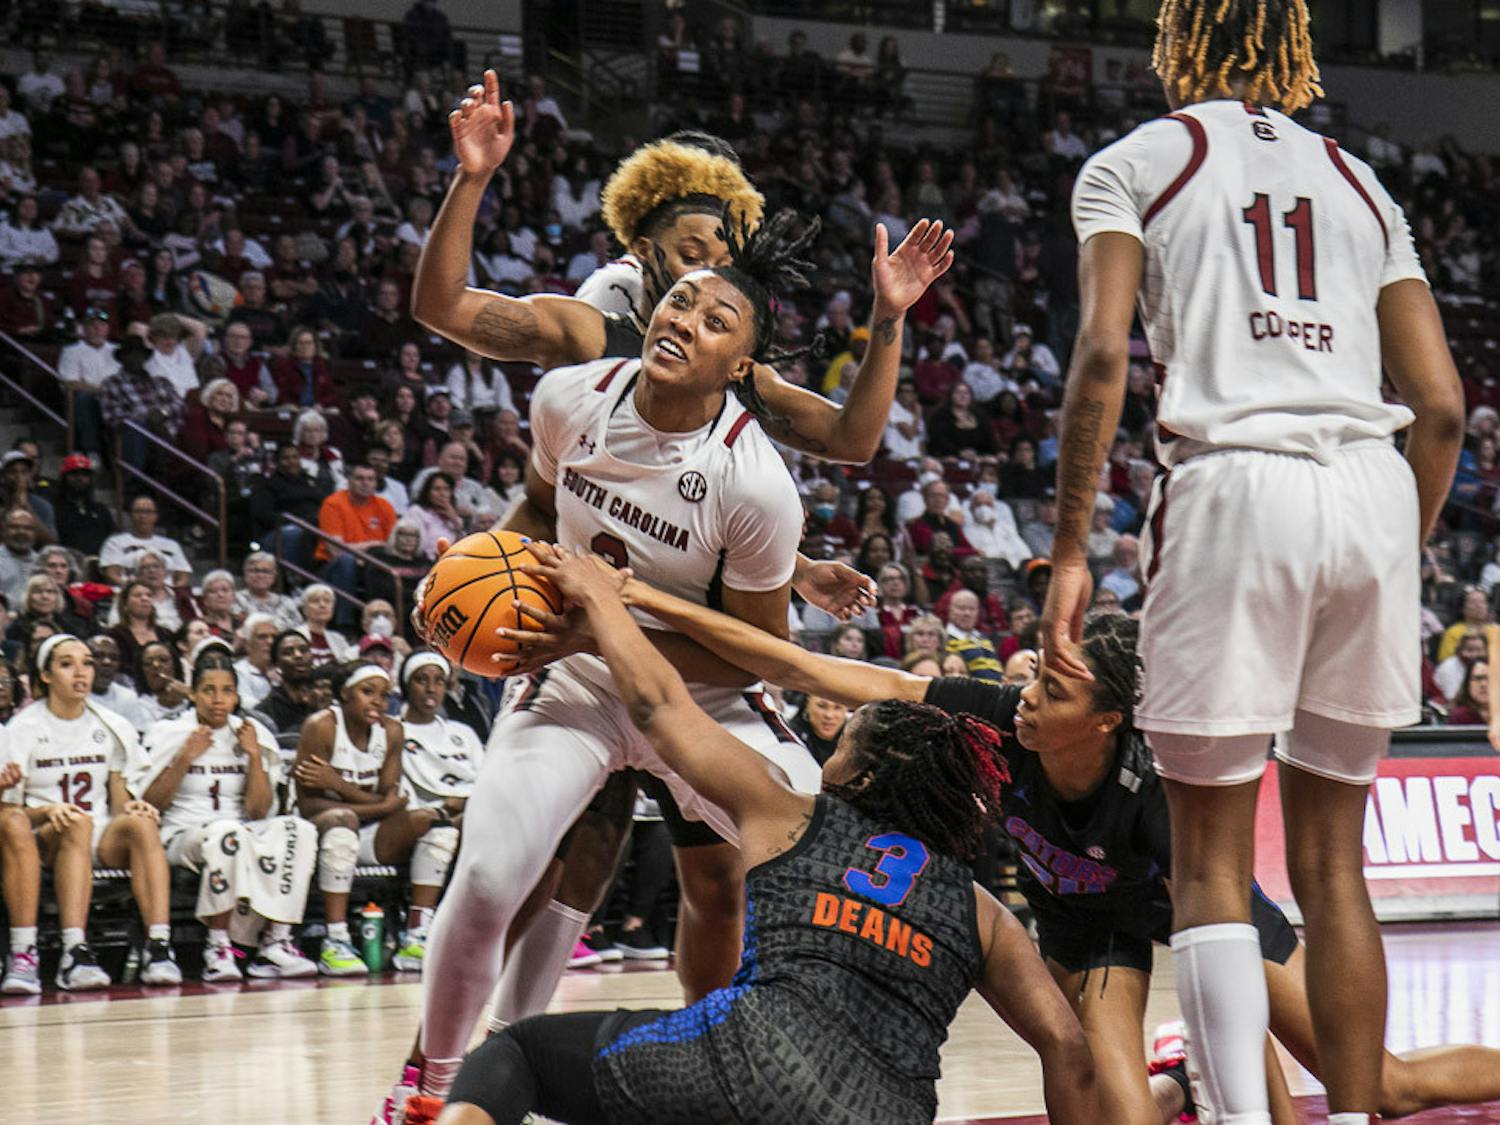 Freshman forward Ashlyn Watkins tries to maintain possession of the ball as the Gator's defense closes in during the second half of the game at Colonial Life Arena on Feb. 16, 2023. The Gamecocks beat the Gators 87-56.